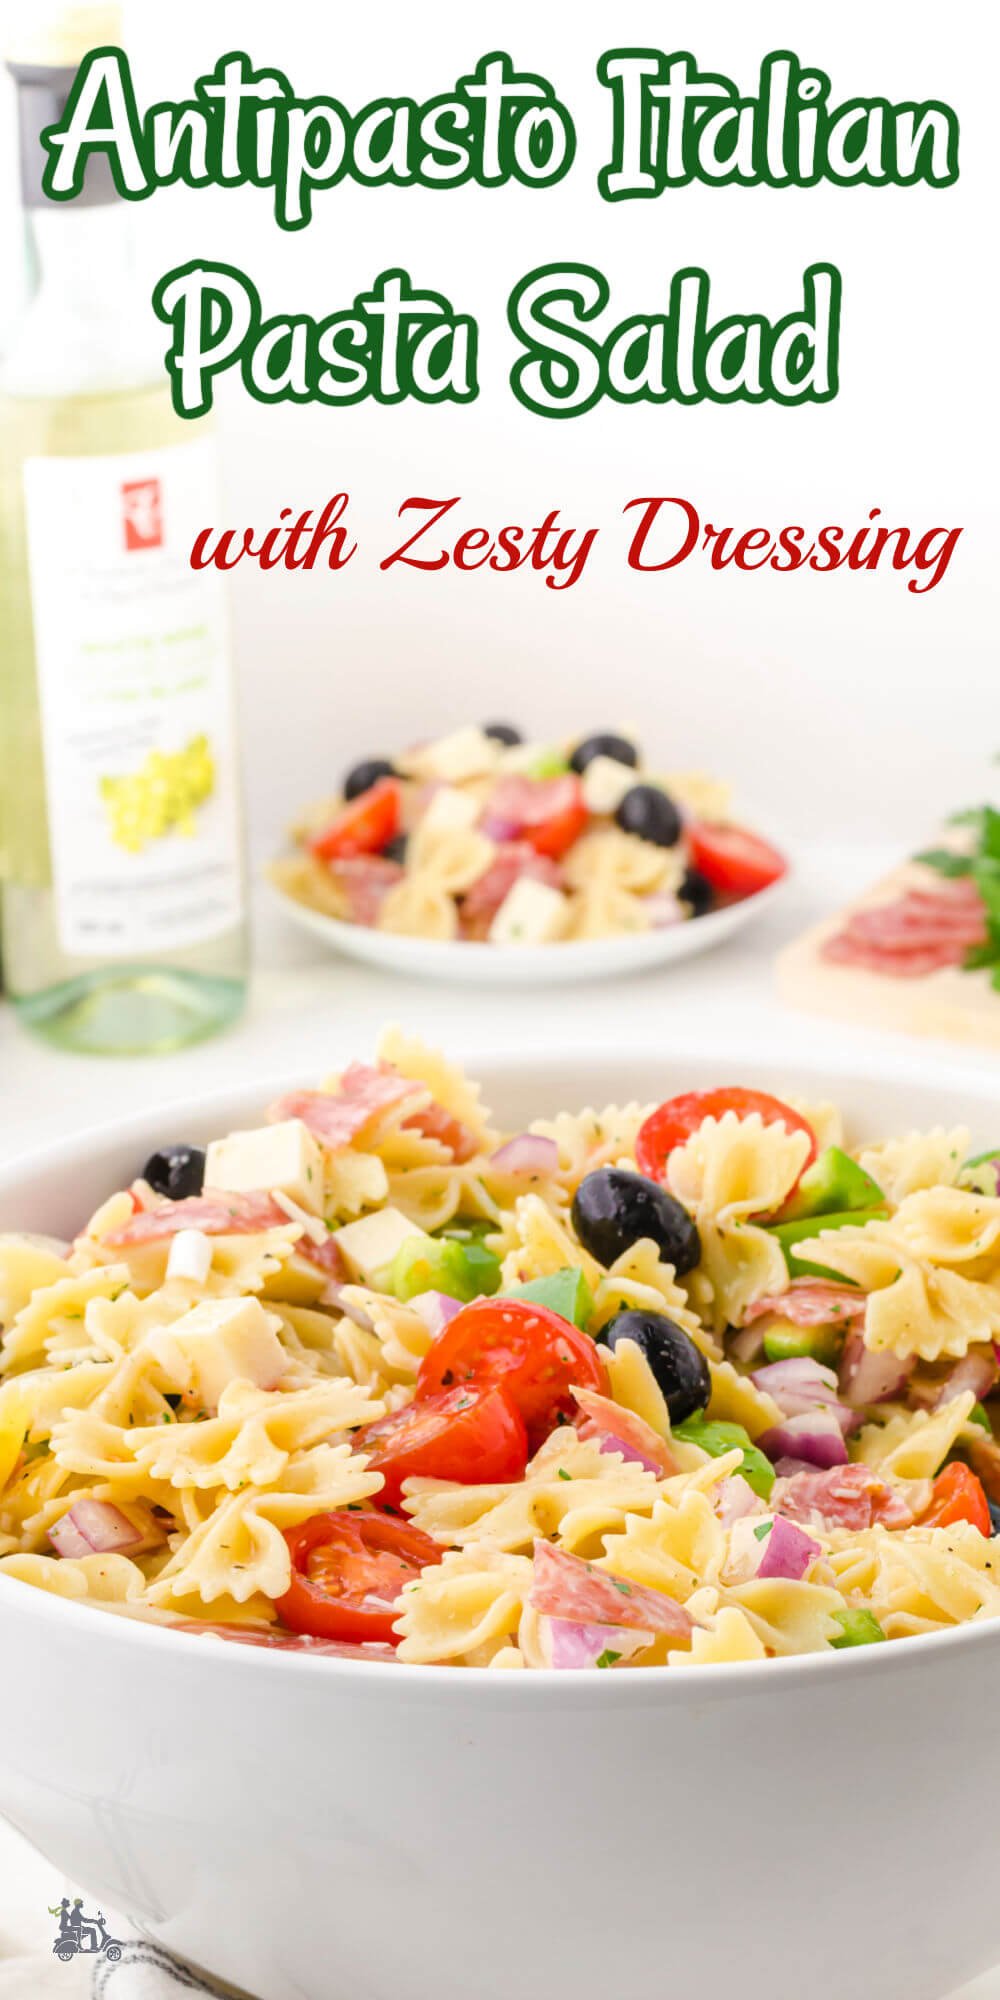 This Zesty Italian Pasta Salad recipe is packed with fresh vegetables, flavorful herbs, salami, and delicious cheese. It's perfect for potlucks, barbecues, and picnics! Plus, it's easy to make so you can focus on enjoying the warm weather. This antipasto farfalle pasta salad will go fast and this recipe makes plenty for the crowd.